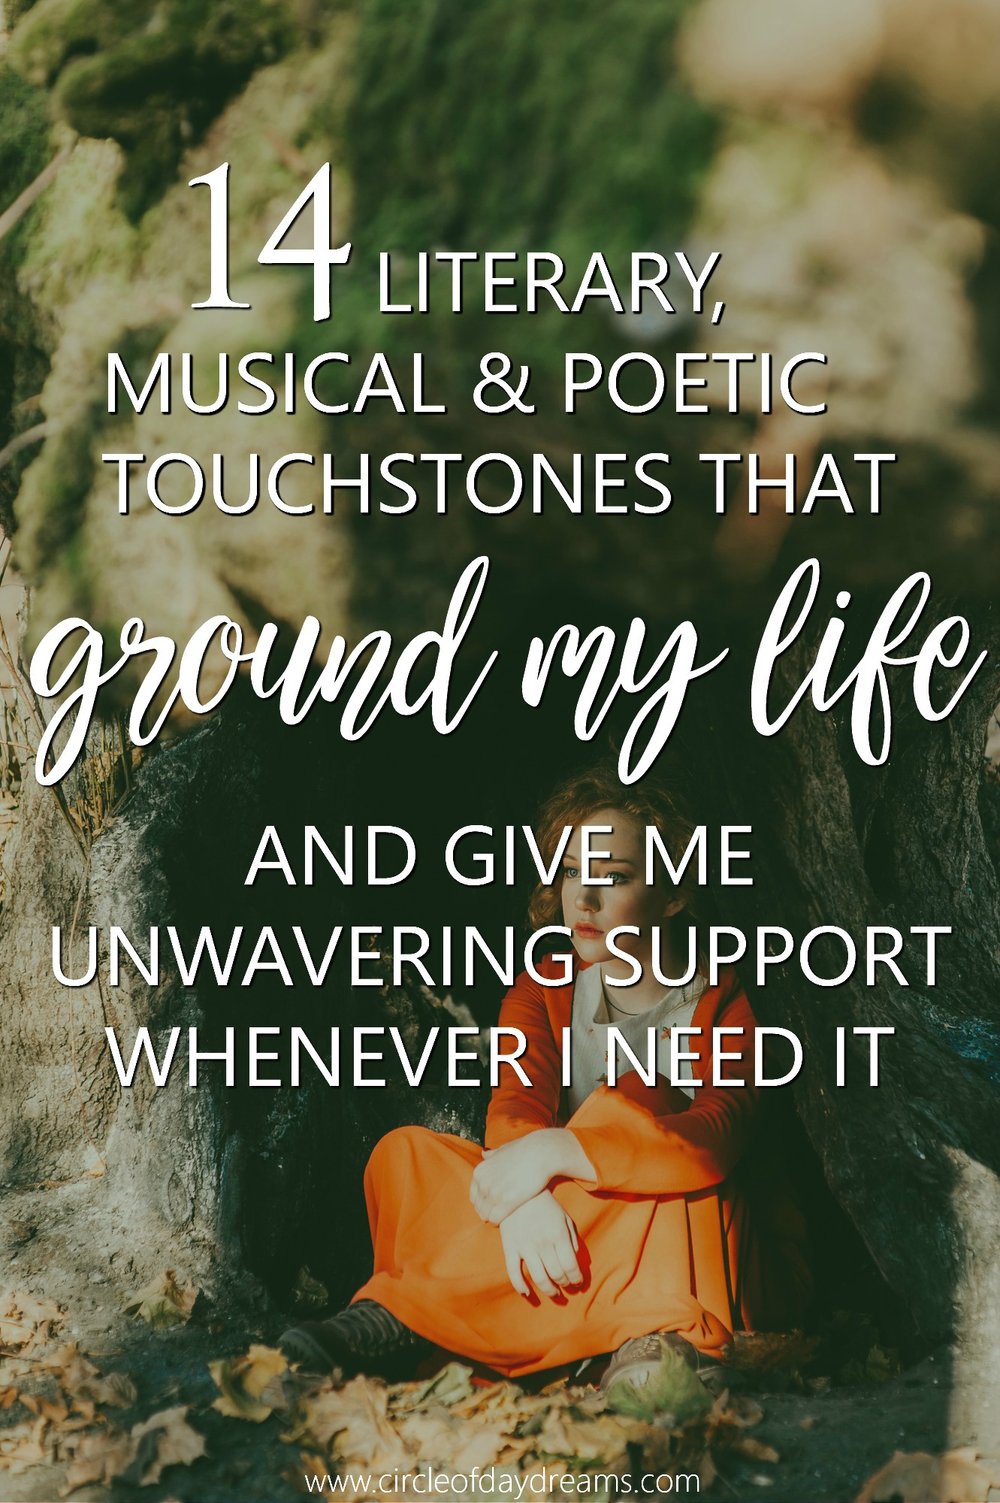 14 Literary, Musical and Poetic Touchstones That Ground My Life and Give Me Unwavering Support Whenever I Need It